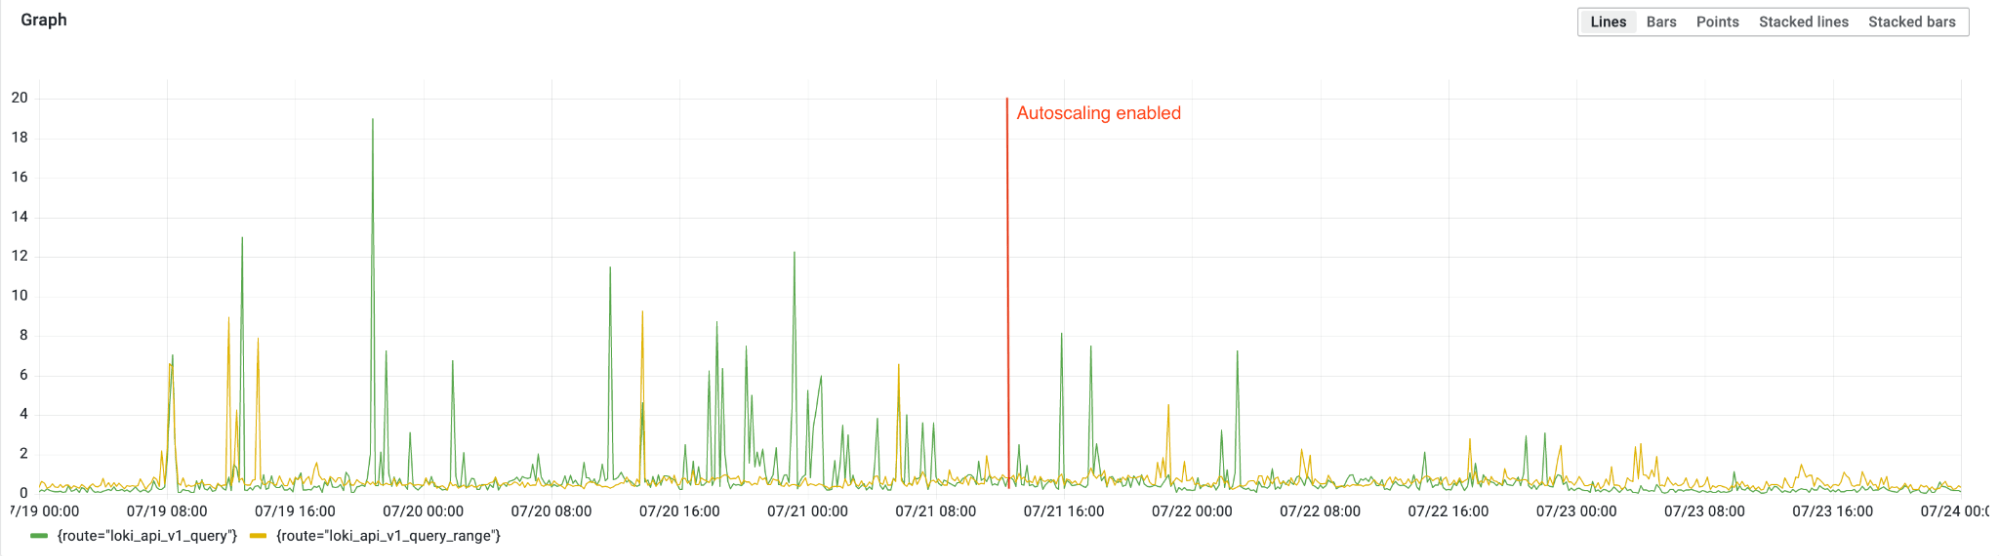 *After enabling the querier autoscaler, the query latency did not get worse.*